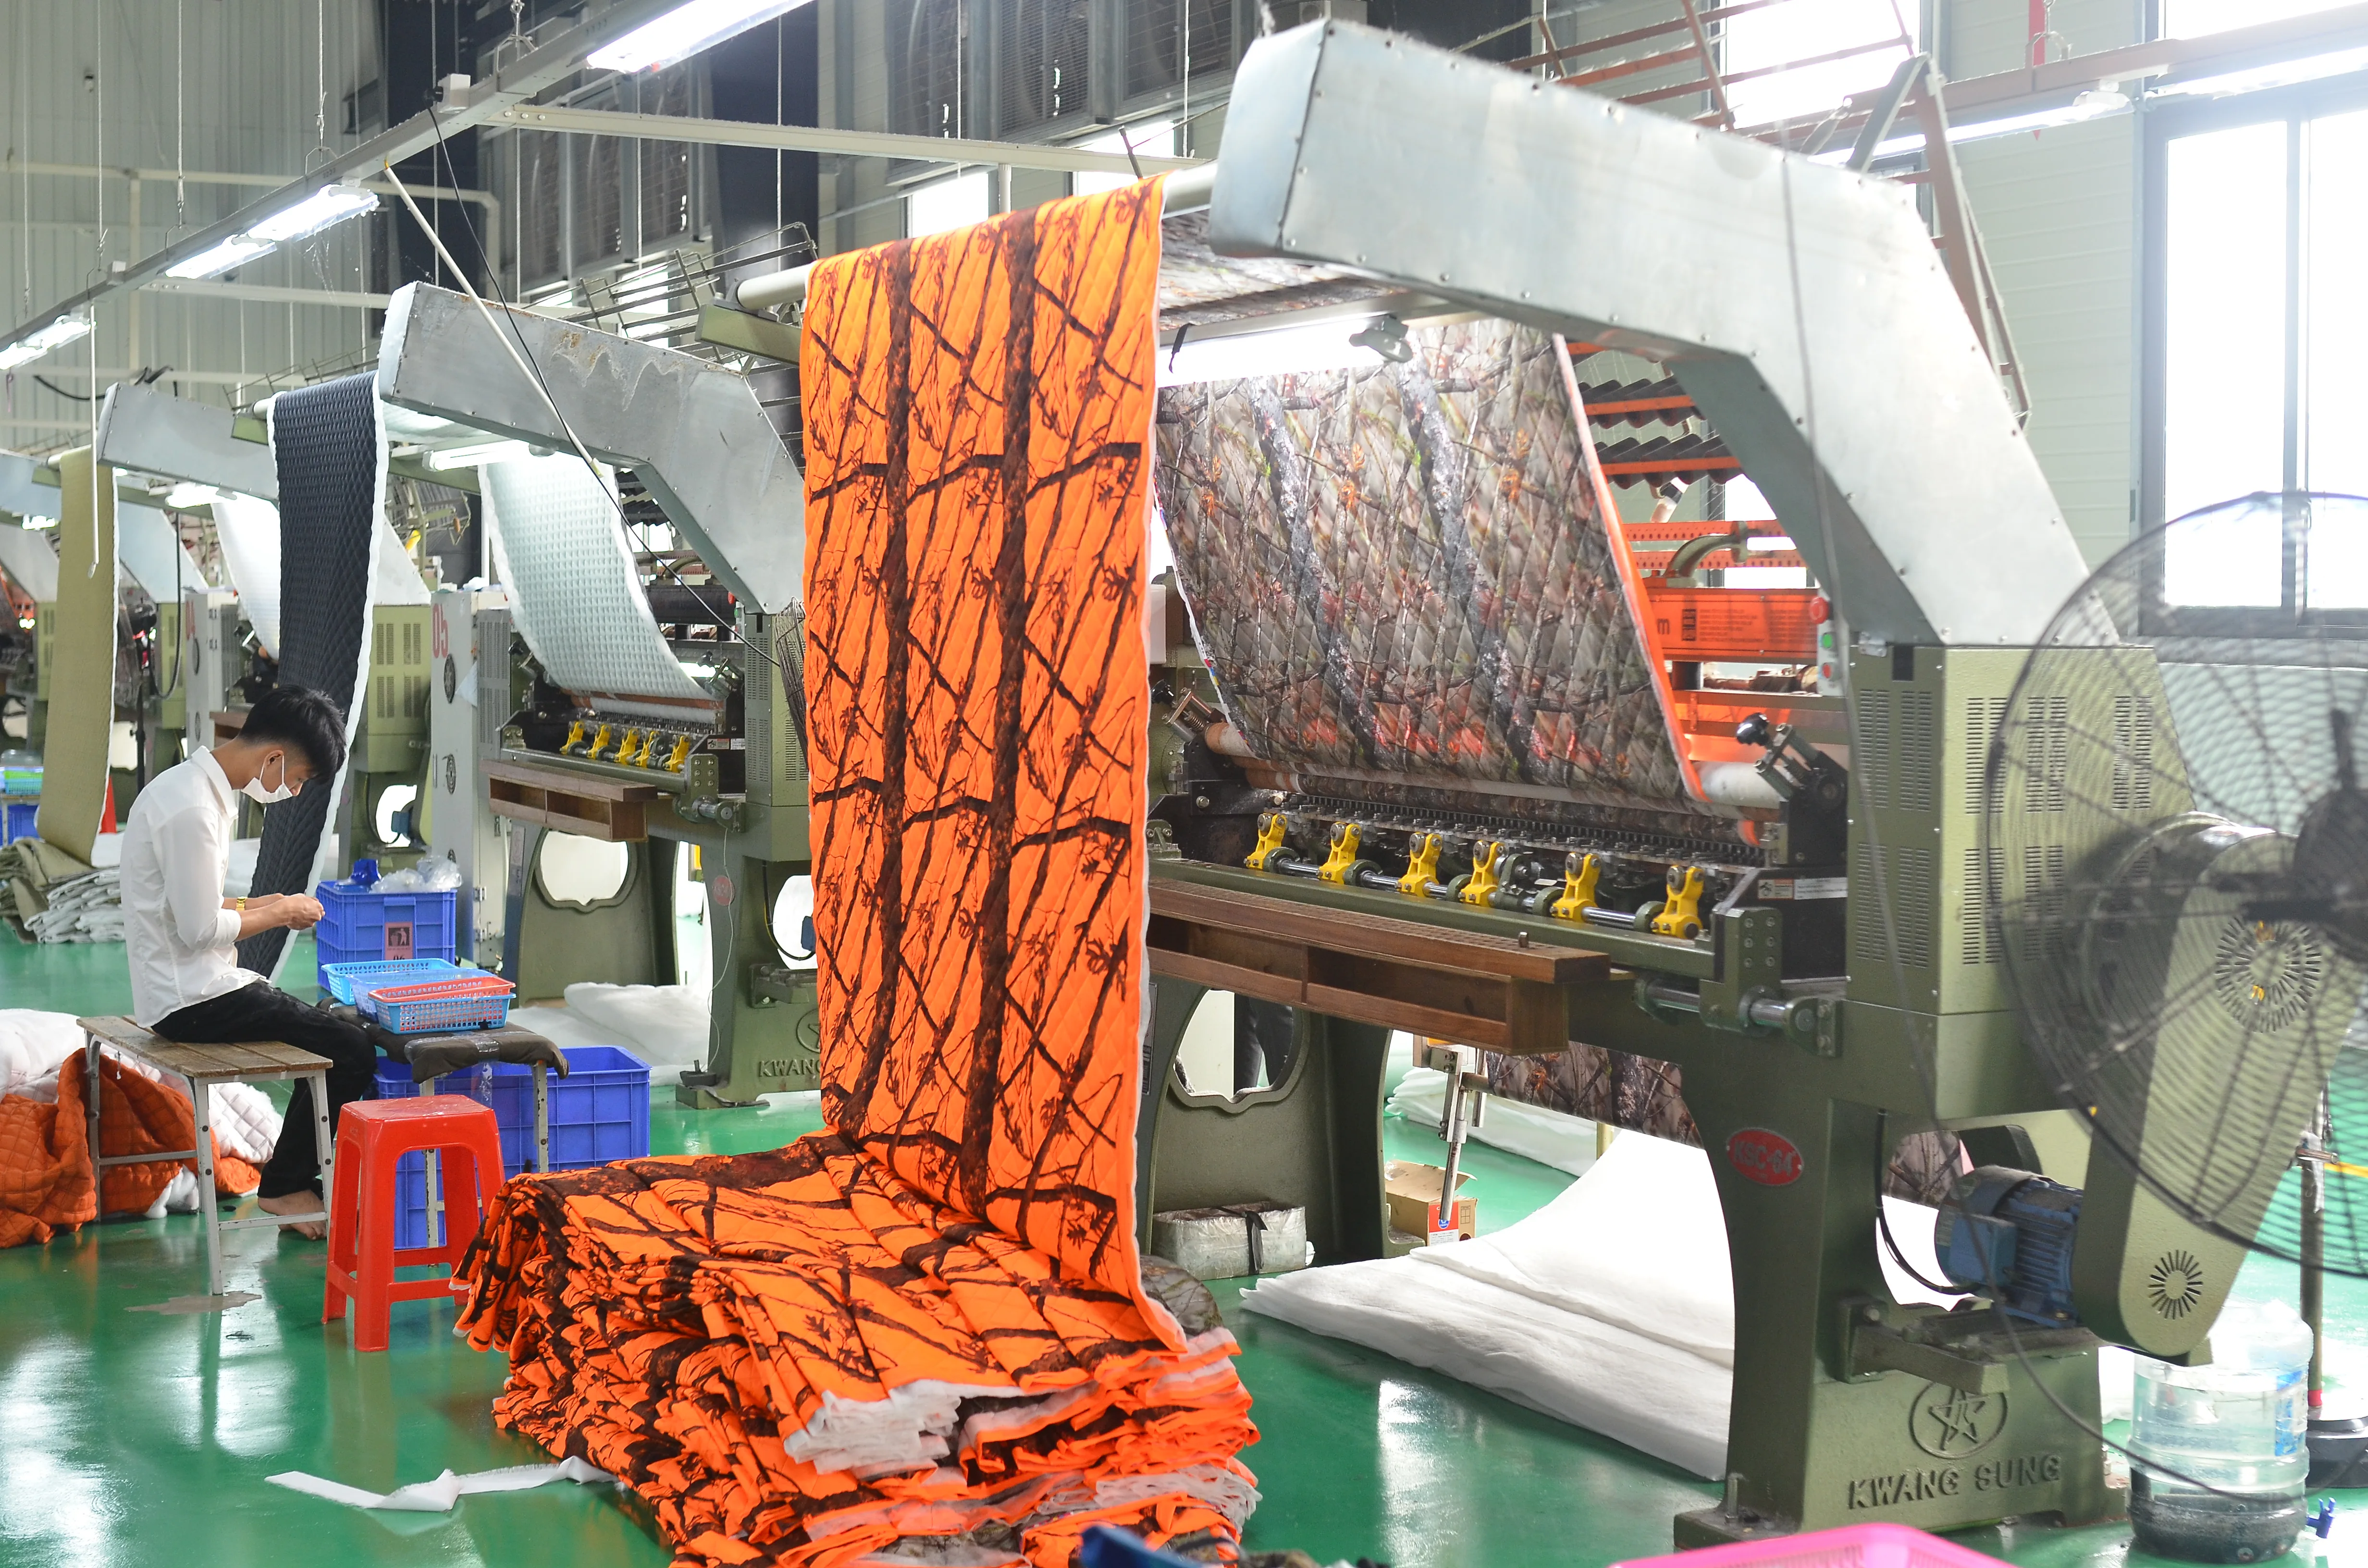 
Hot OEM Polyester material batting Batting Quilted Fabric for Apparel Manufacturing 